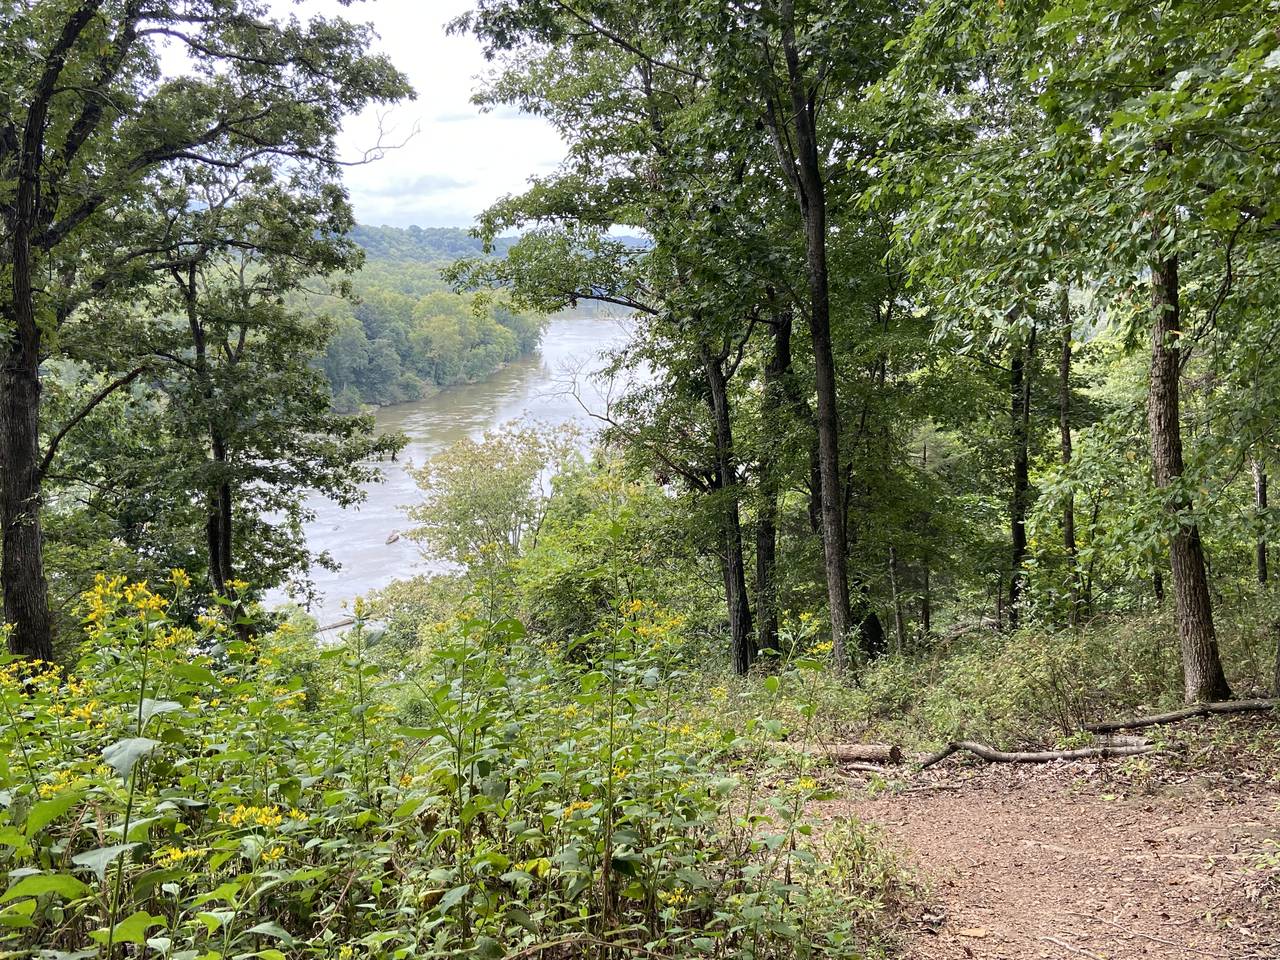 The Murphy-Chambers Farm Loop Trail in Harpers Ferry National Historical Park in West Virginia offers sweeping views of the Shenandoah River.